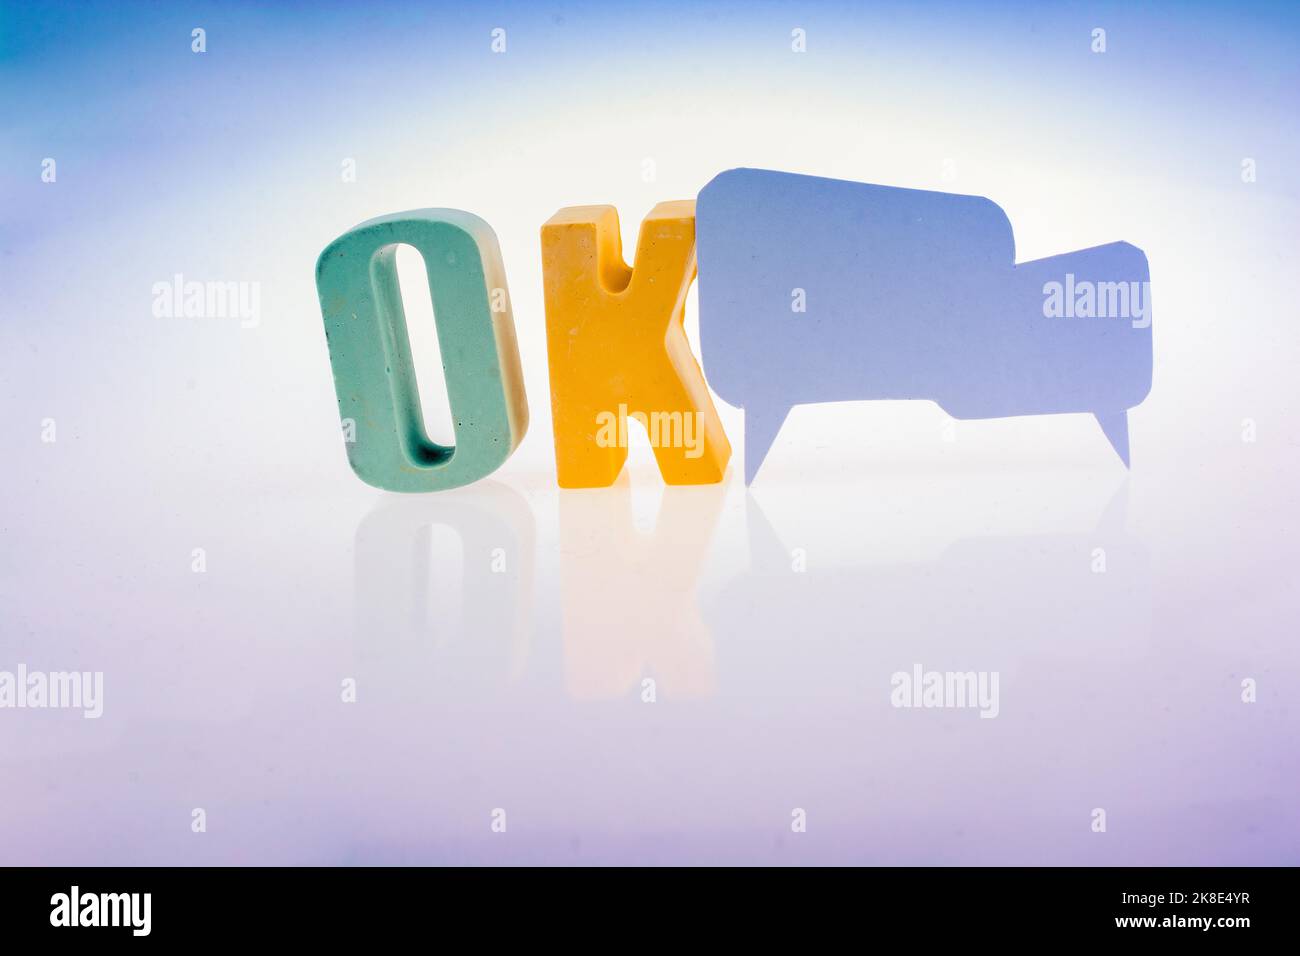 Speech bubble the word OK written with colorful letter blocks Stock Photo